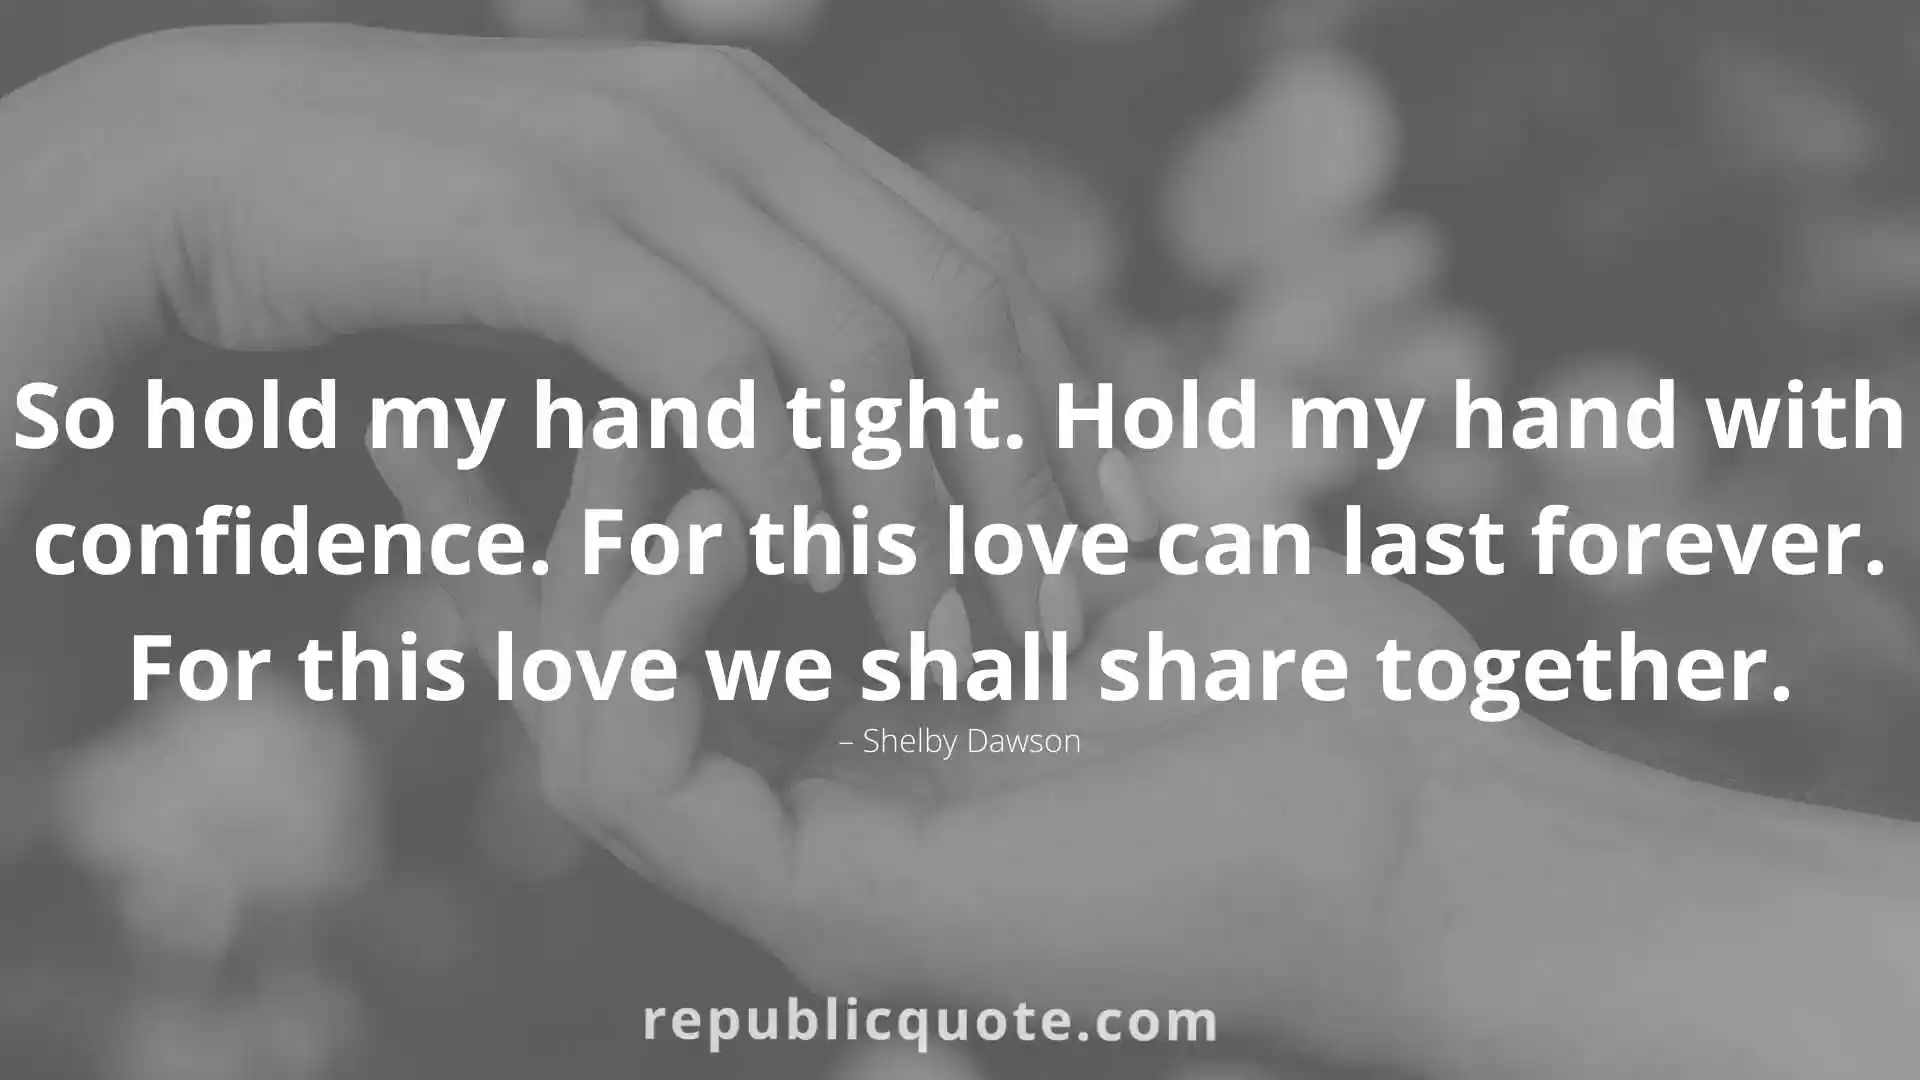 Holding Hands Quotes